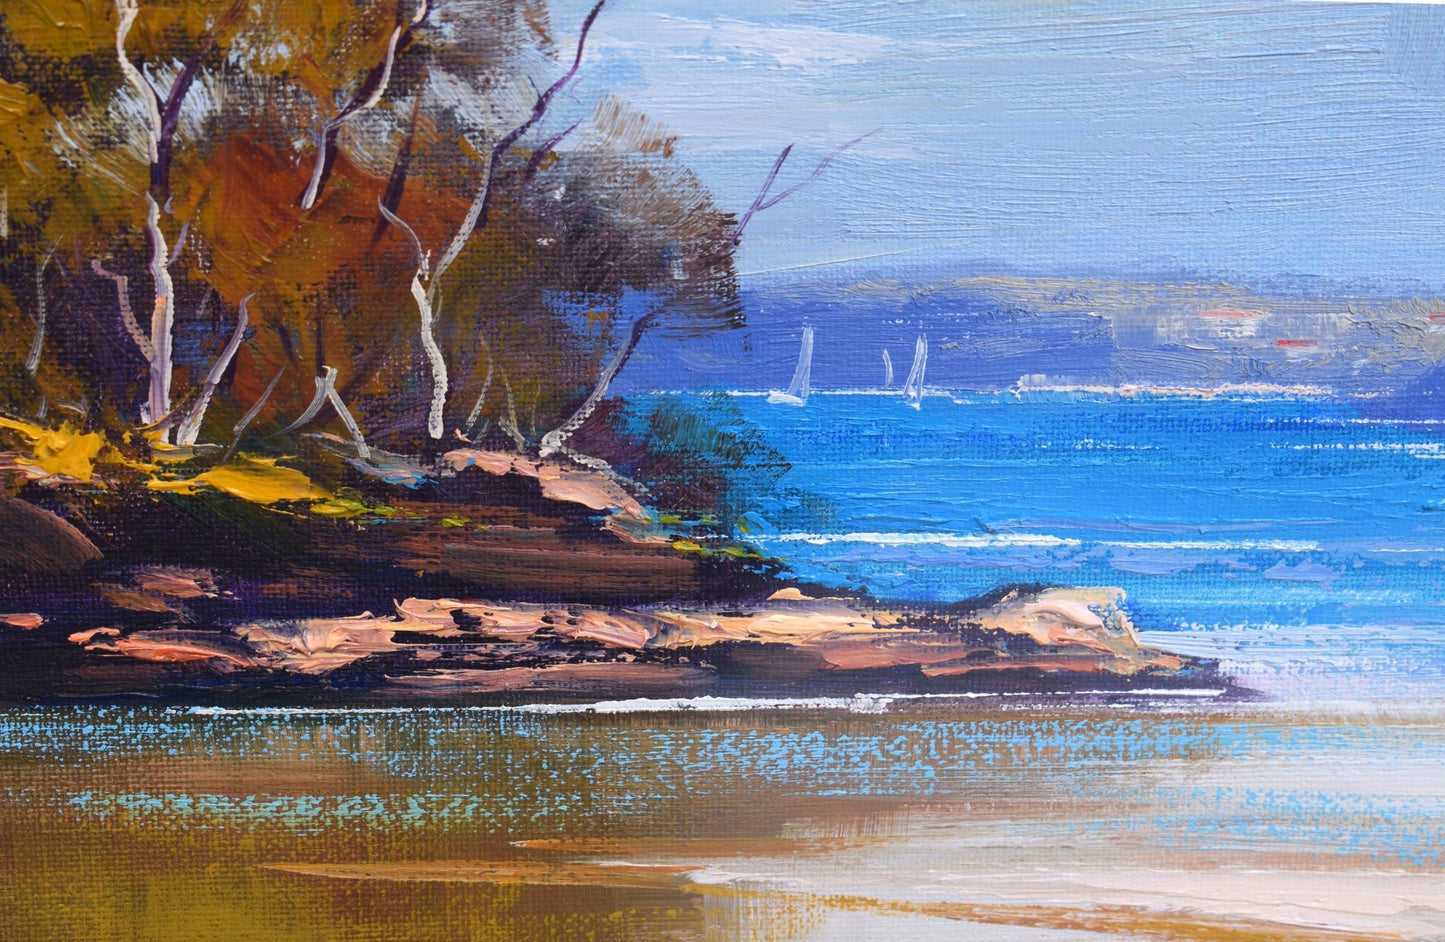 FRAMED ORIGINAL OIL PAINTING BEAUTIFUL EXPRESSIVE SEASCAPE COLLINS BEACH SYDNEY HARBOUR BY GRAHAM GERCKEN